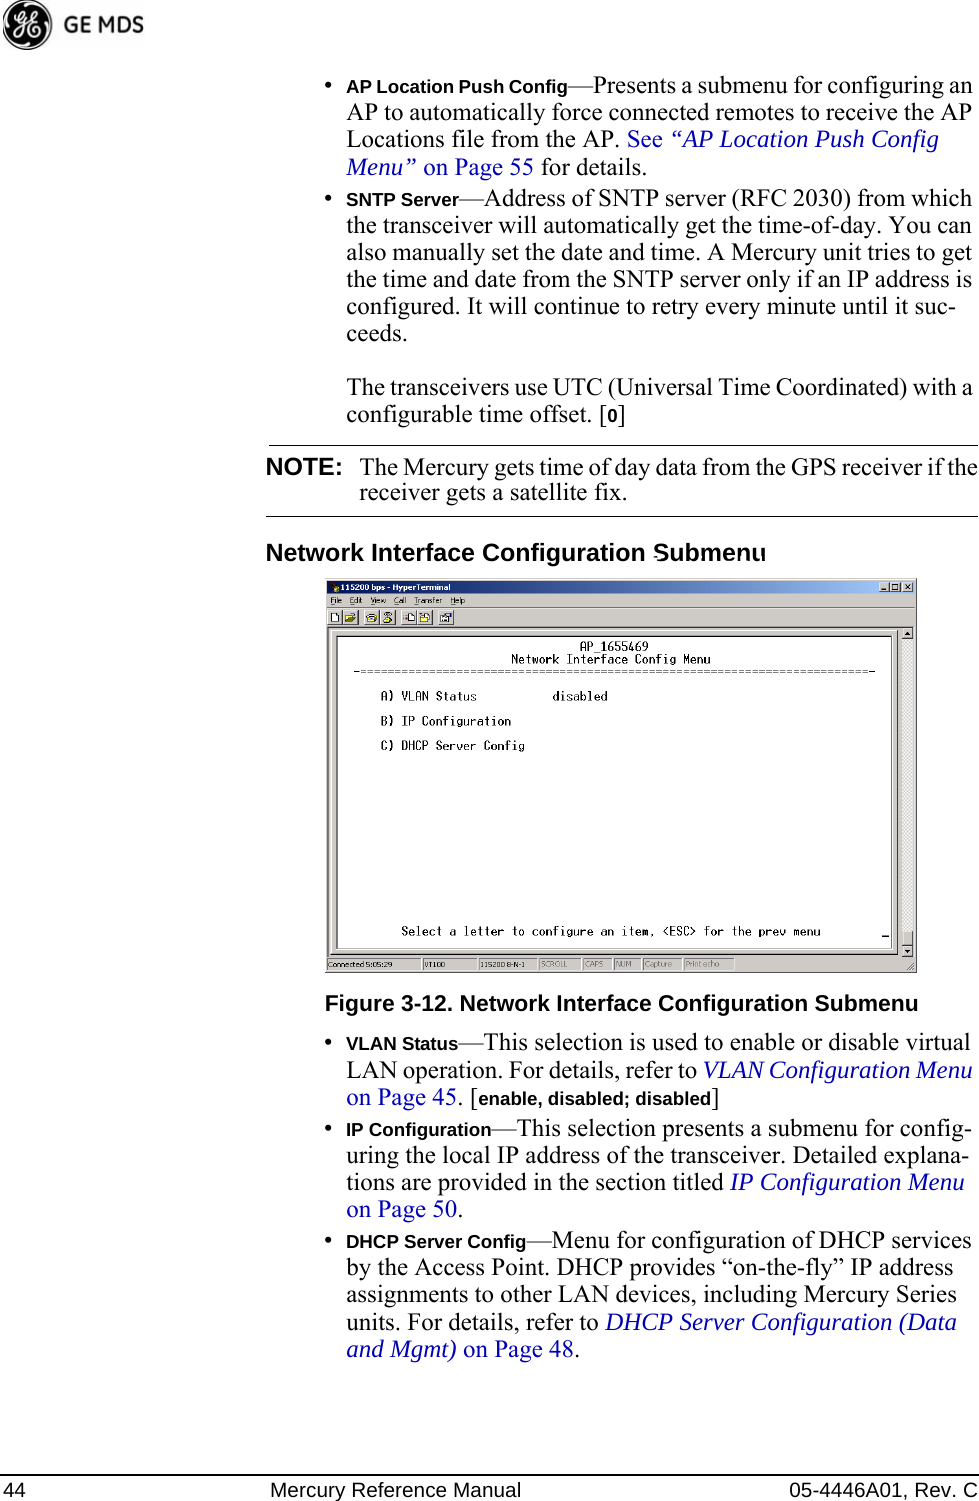 44 Mercury Reference Manual 05-4446A01, Rev. C•AP Location Push Config—Presents a submenu for configuring an AP to automatically force connected remotes to receive the AP Locations file from the AP. See “AP Location Push Config Menu” on Page 55 for details.•SNTP Server—Address of SNTP server (RFC 2030) from which the transceiver will automatically get the time-of-day. You can also manually set the date and time. A Mercury unit tries to get the time and date from the SNTP server only if an IP address is configured. It will continue to retry every minute until it suc-ceeds. The transceivers use UTC (Universal Time Coordinated) with a configurable time offset. [0]NOTE: The Mercury gets time of day data from the GPS receiver if thereceiver gets a satellite fix.Network Interface Configuration SubmenuInvisible place holderFigure 3-12. Network Interface Configuration Submenu•VLAN Status—This selection is used to enable or disable virtual LAN operation. For details, refer to VLAN Configuration Menu on Page 45. [enable, disabled; disabled]•IP Configuration—This selection presents a submenu for config-uring the local IP address of the transceiver. Detailed explana-tions are provided in the section titled IP Configuration Menu on Page 50.•DHCP Server Config—Menu for configuration of DHCP services by the Access Point. DHCP provides “on-the-fly” IP address assignments to other LAN devices, including Mercury Series units. For details, refer to DHCP Server Configuration (Data and Mgmt) on Page 48. 